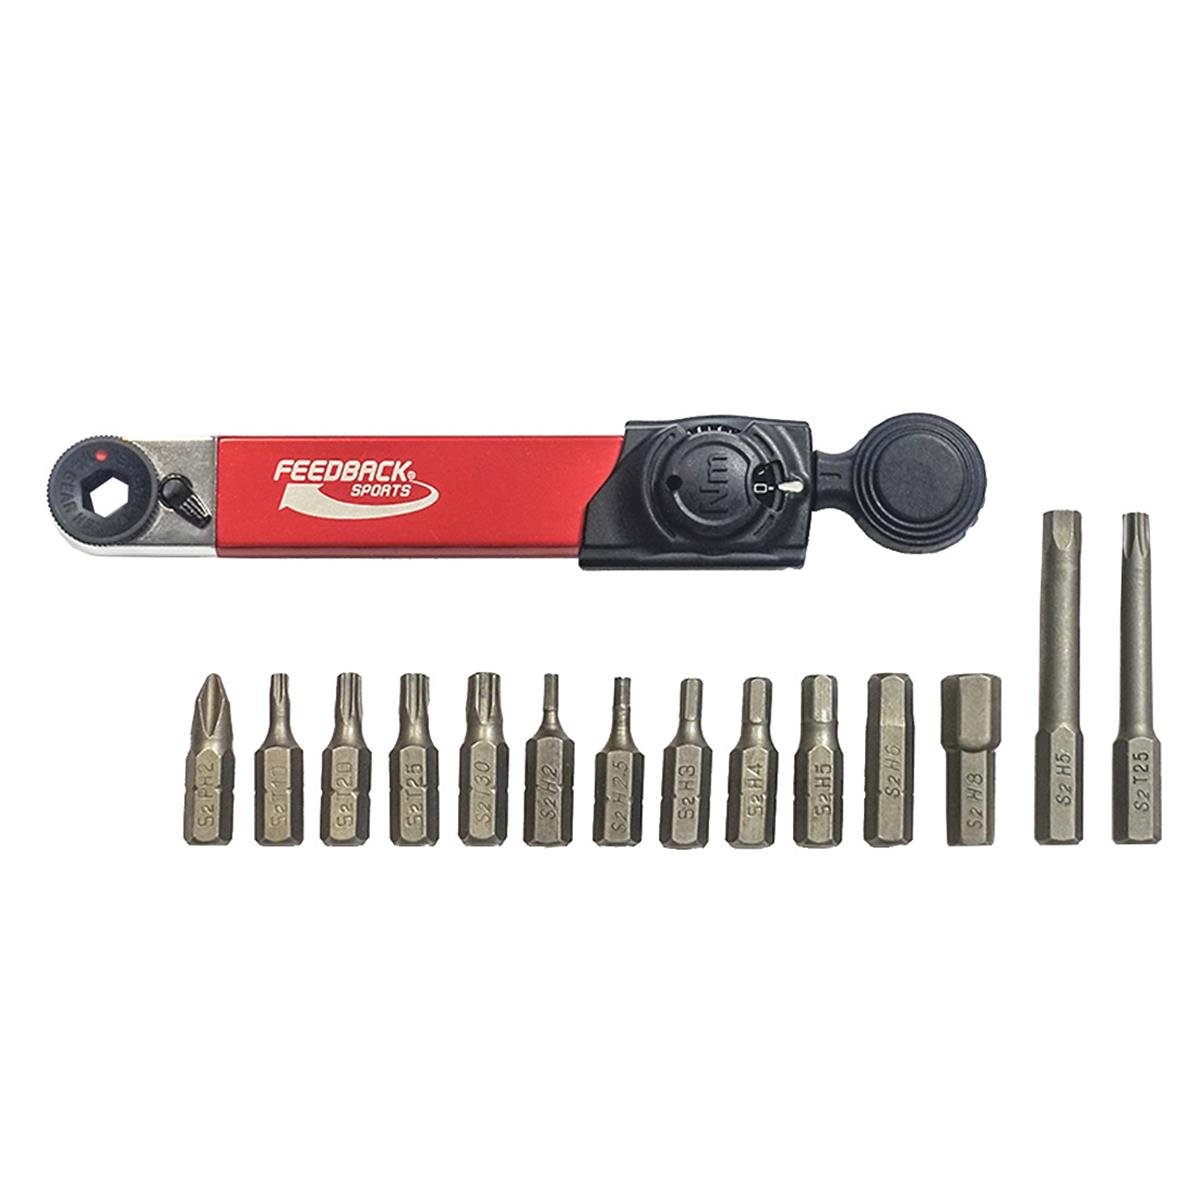 Feedback Sports Click Type Torque Wrench with Bit Set Range 2-10 Nm, with 14 S2 Steel Bits